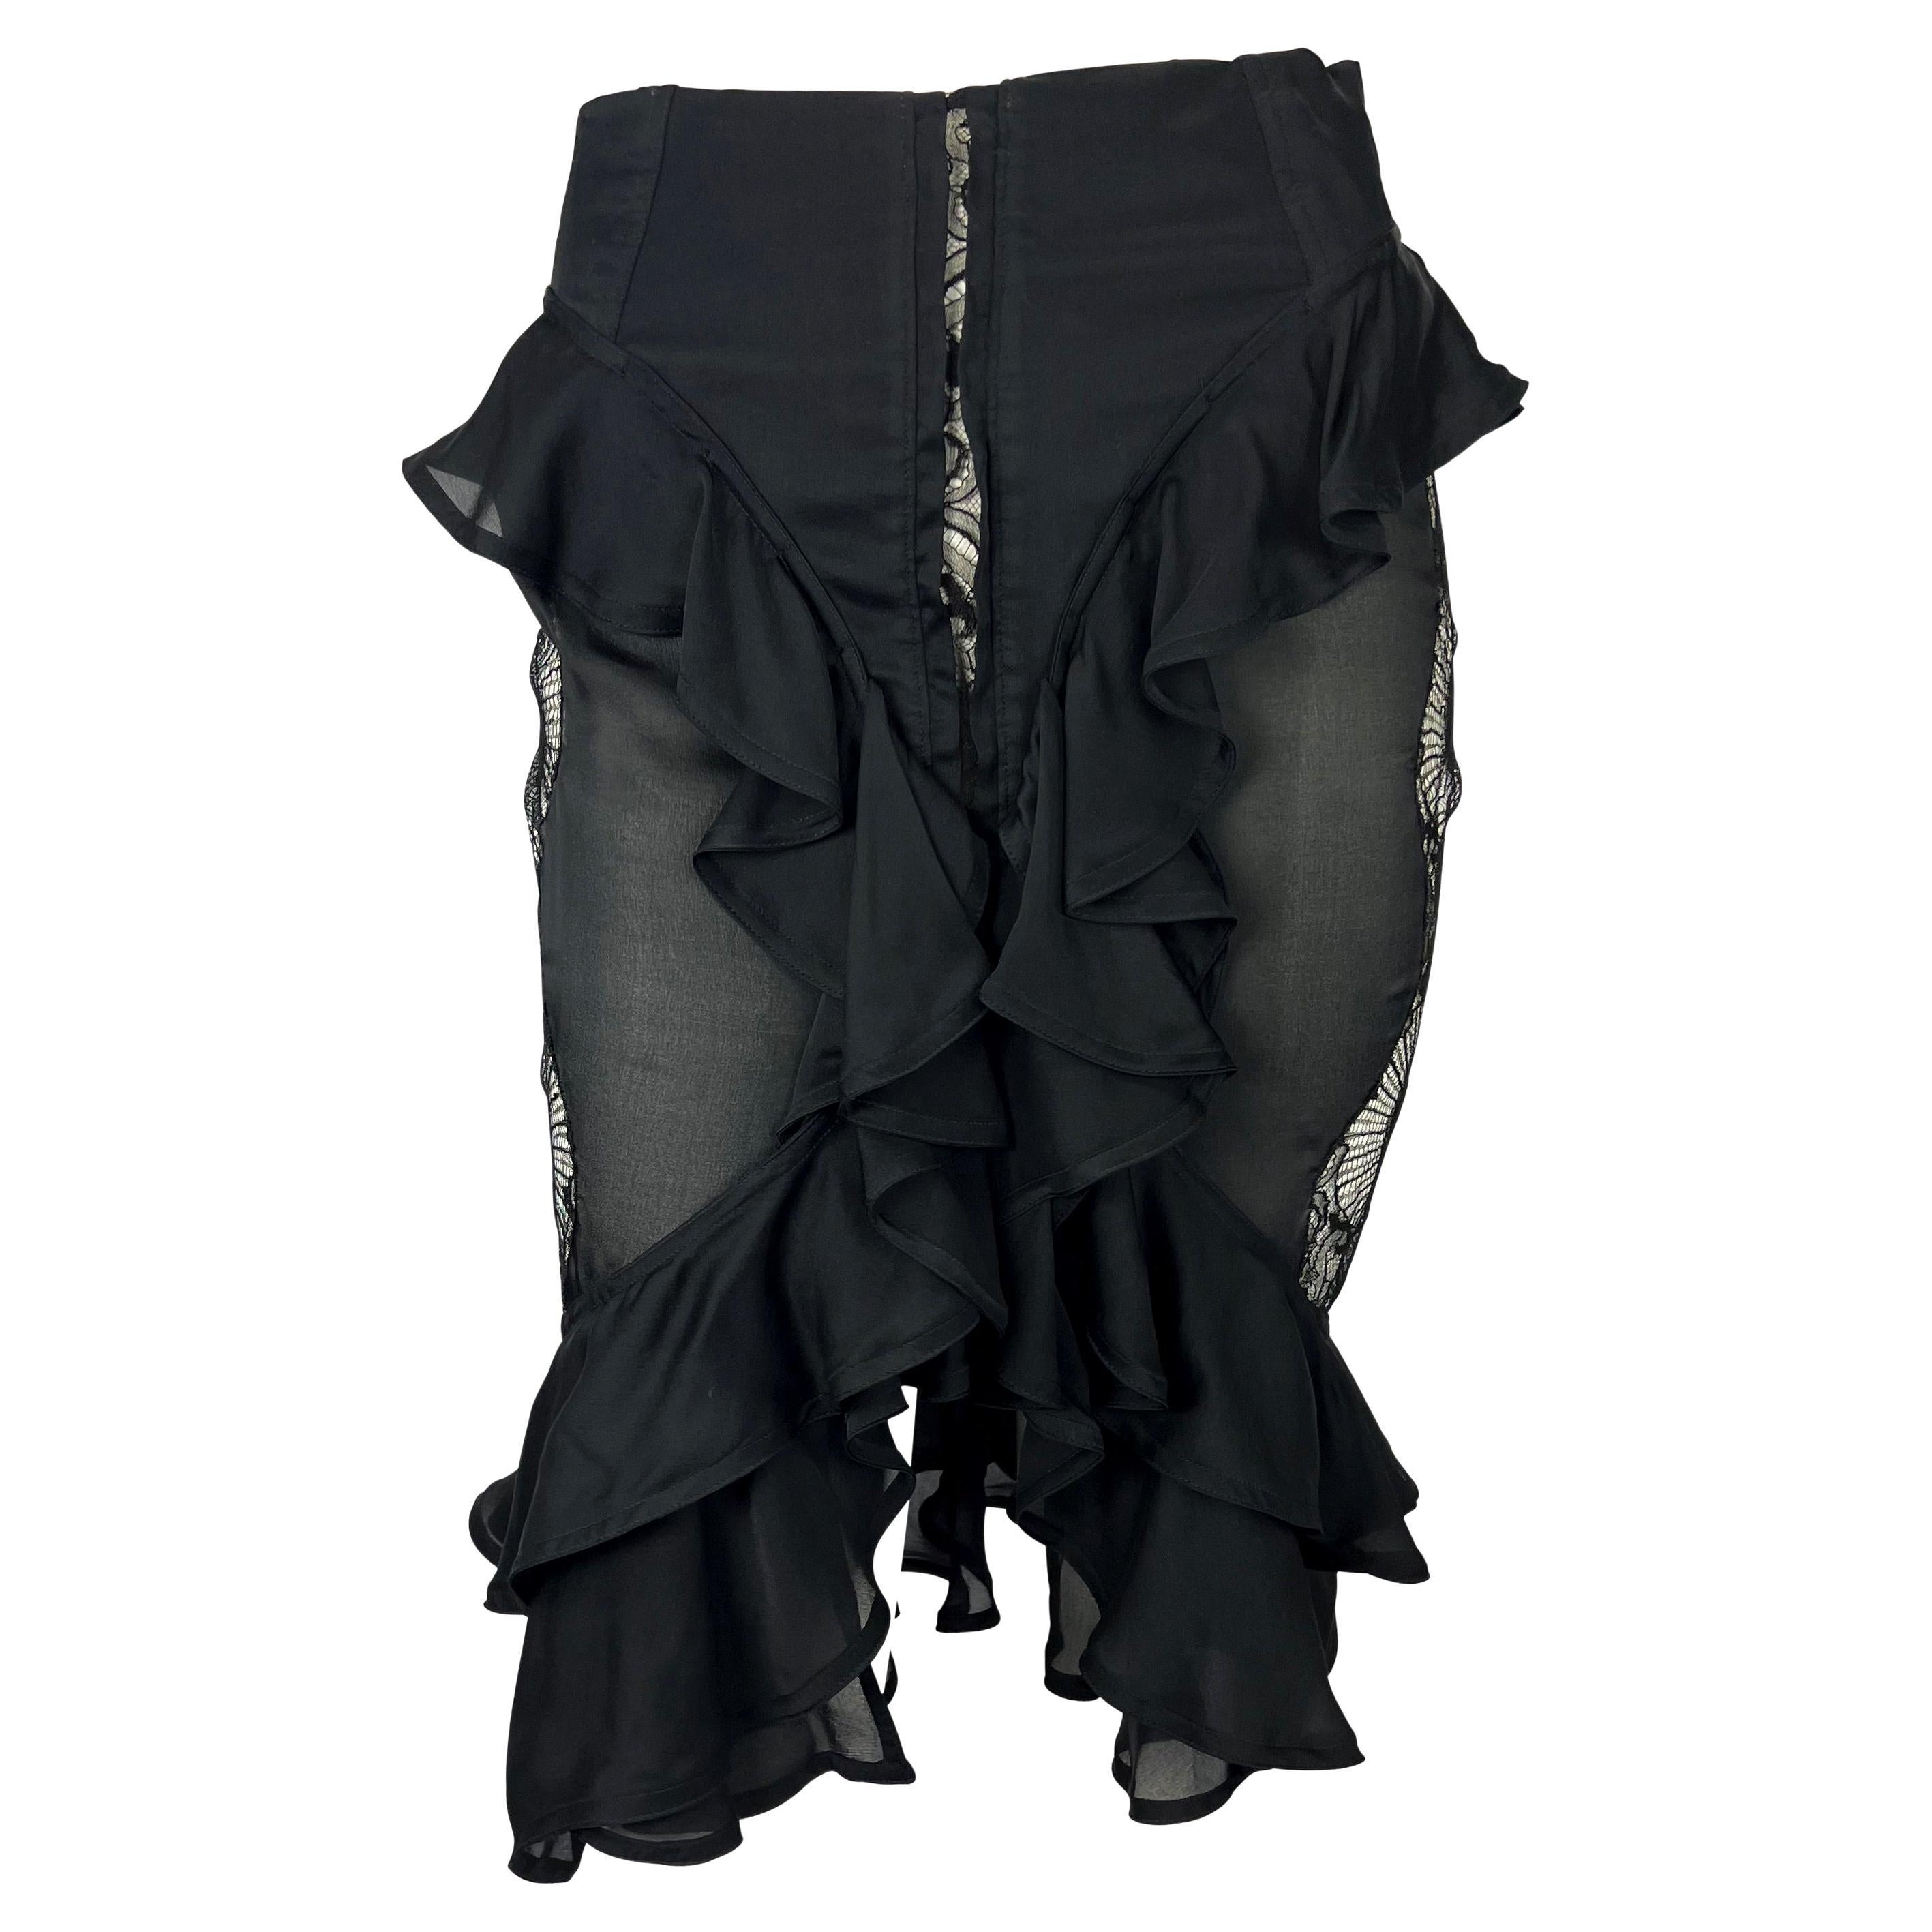 F/W 2003 Yves Saint Laurent by Tom Ford Sheer Lace Satin Ruffled Top Skirt Set For Sale 7